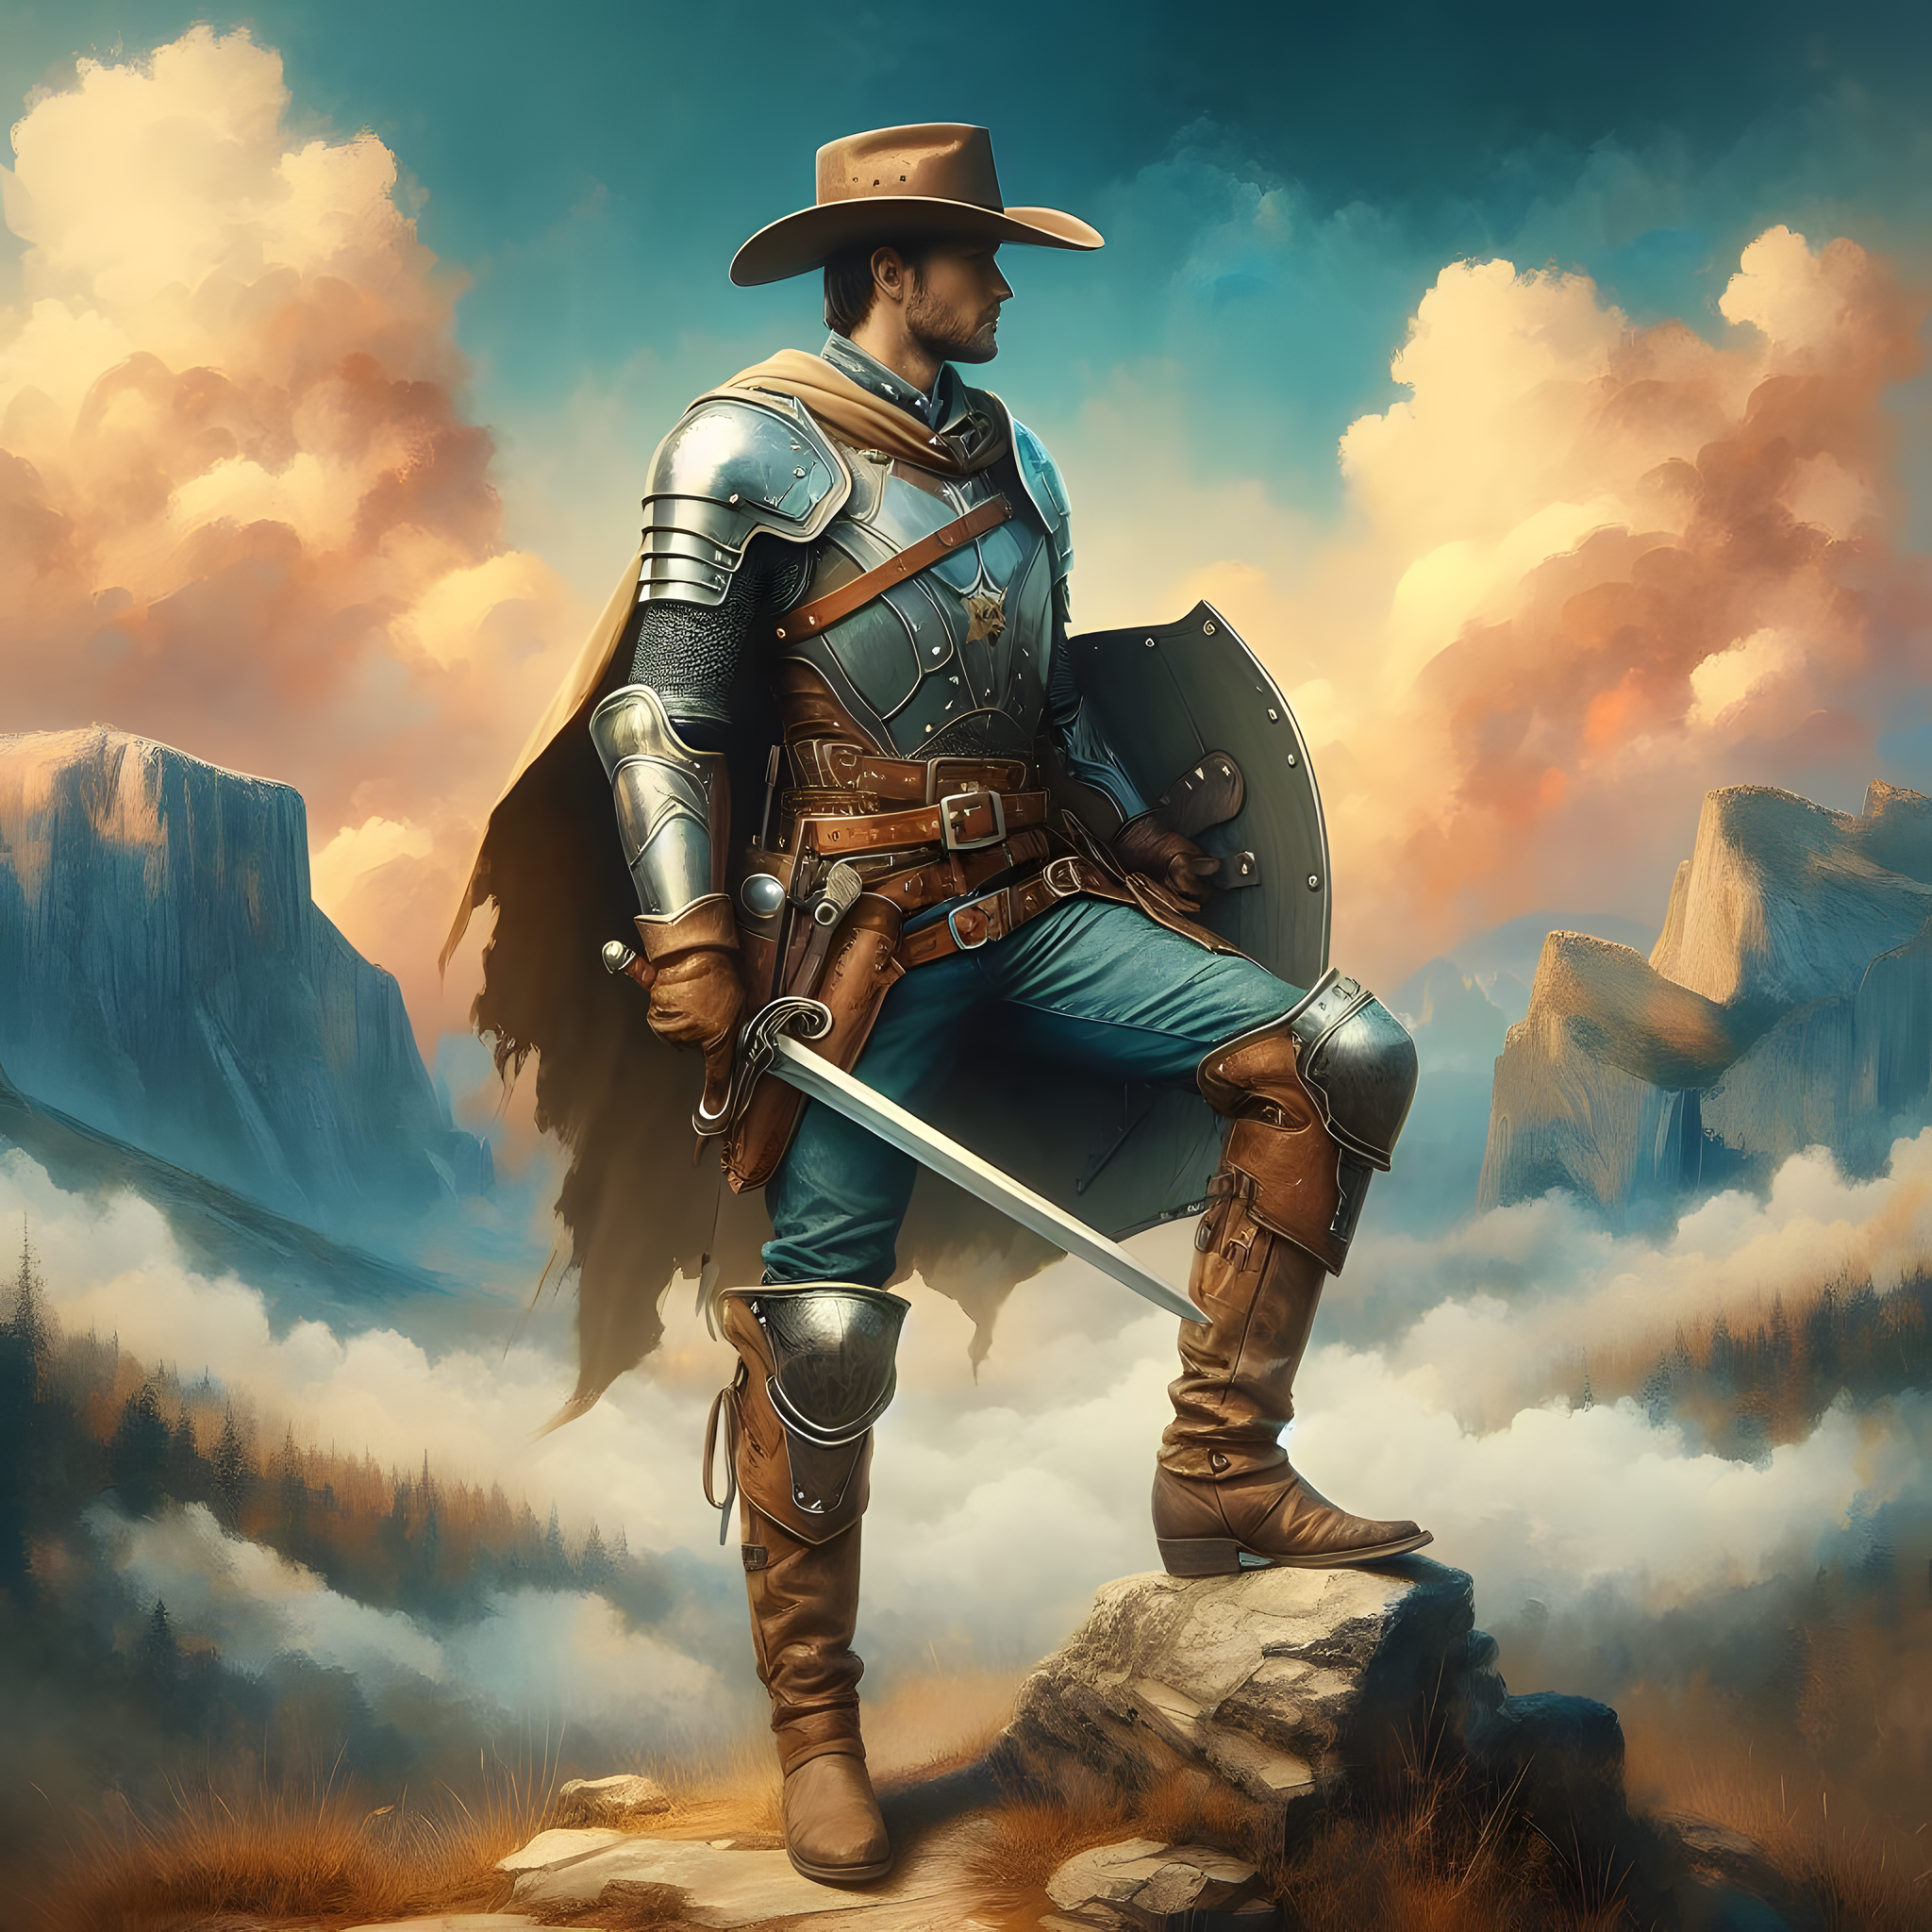 General 2048x2048 knight mountains sword shield AI art looking away standing men with swords clouds armor men with hats hat sky trees outdoors men outdoors cape